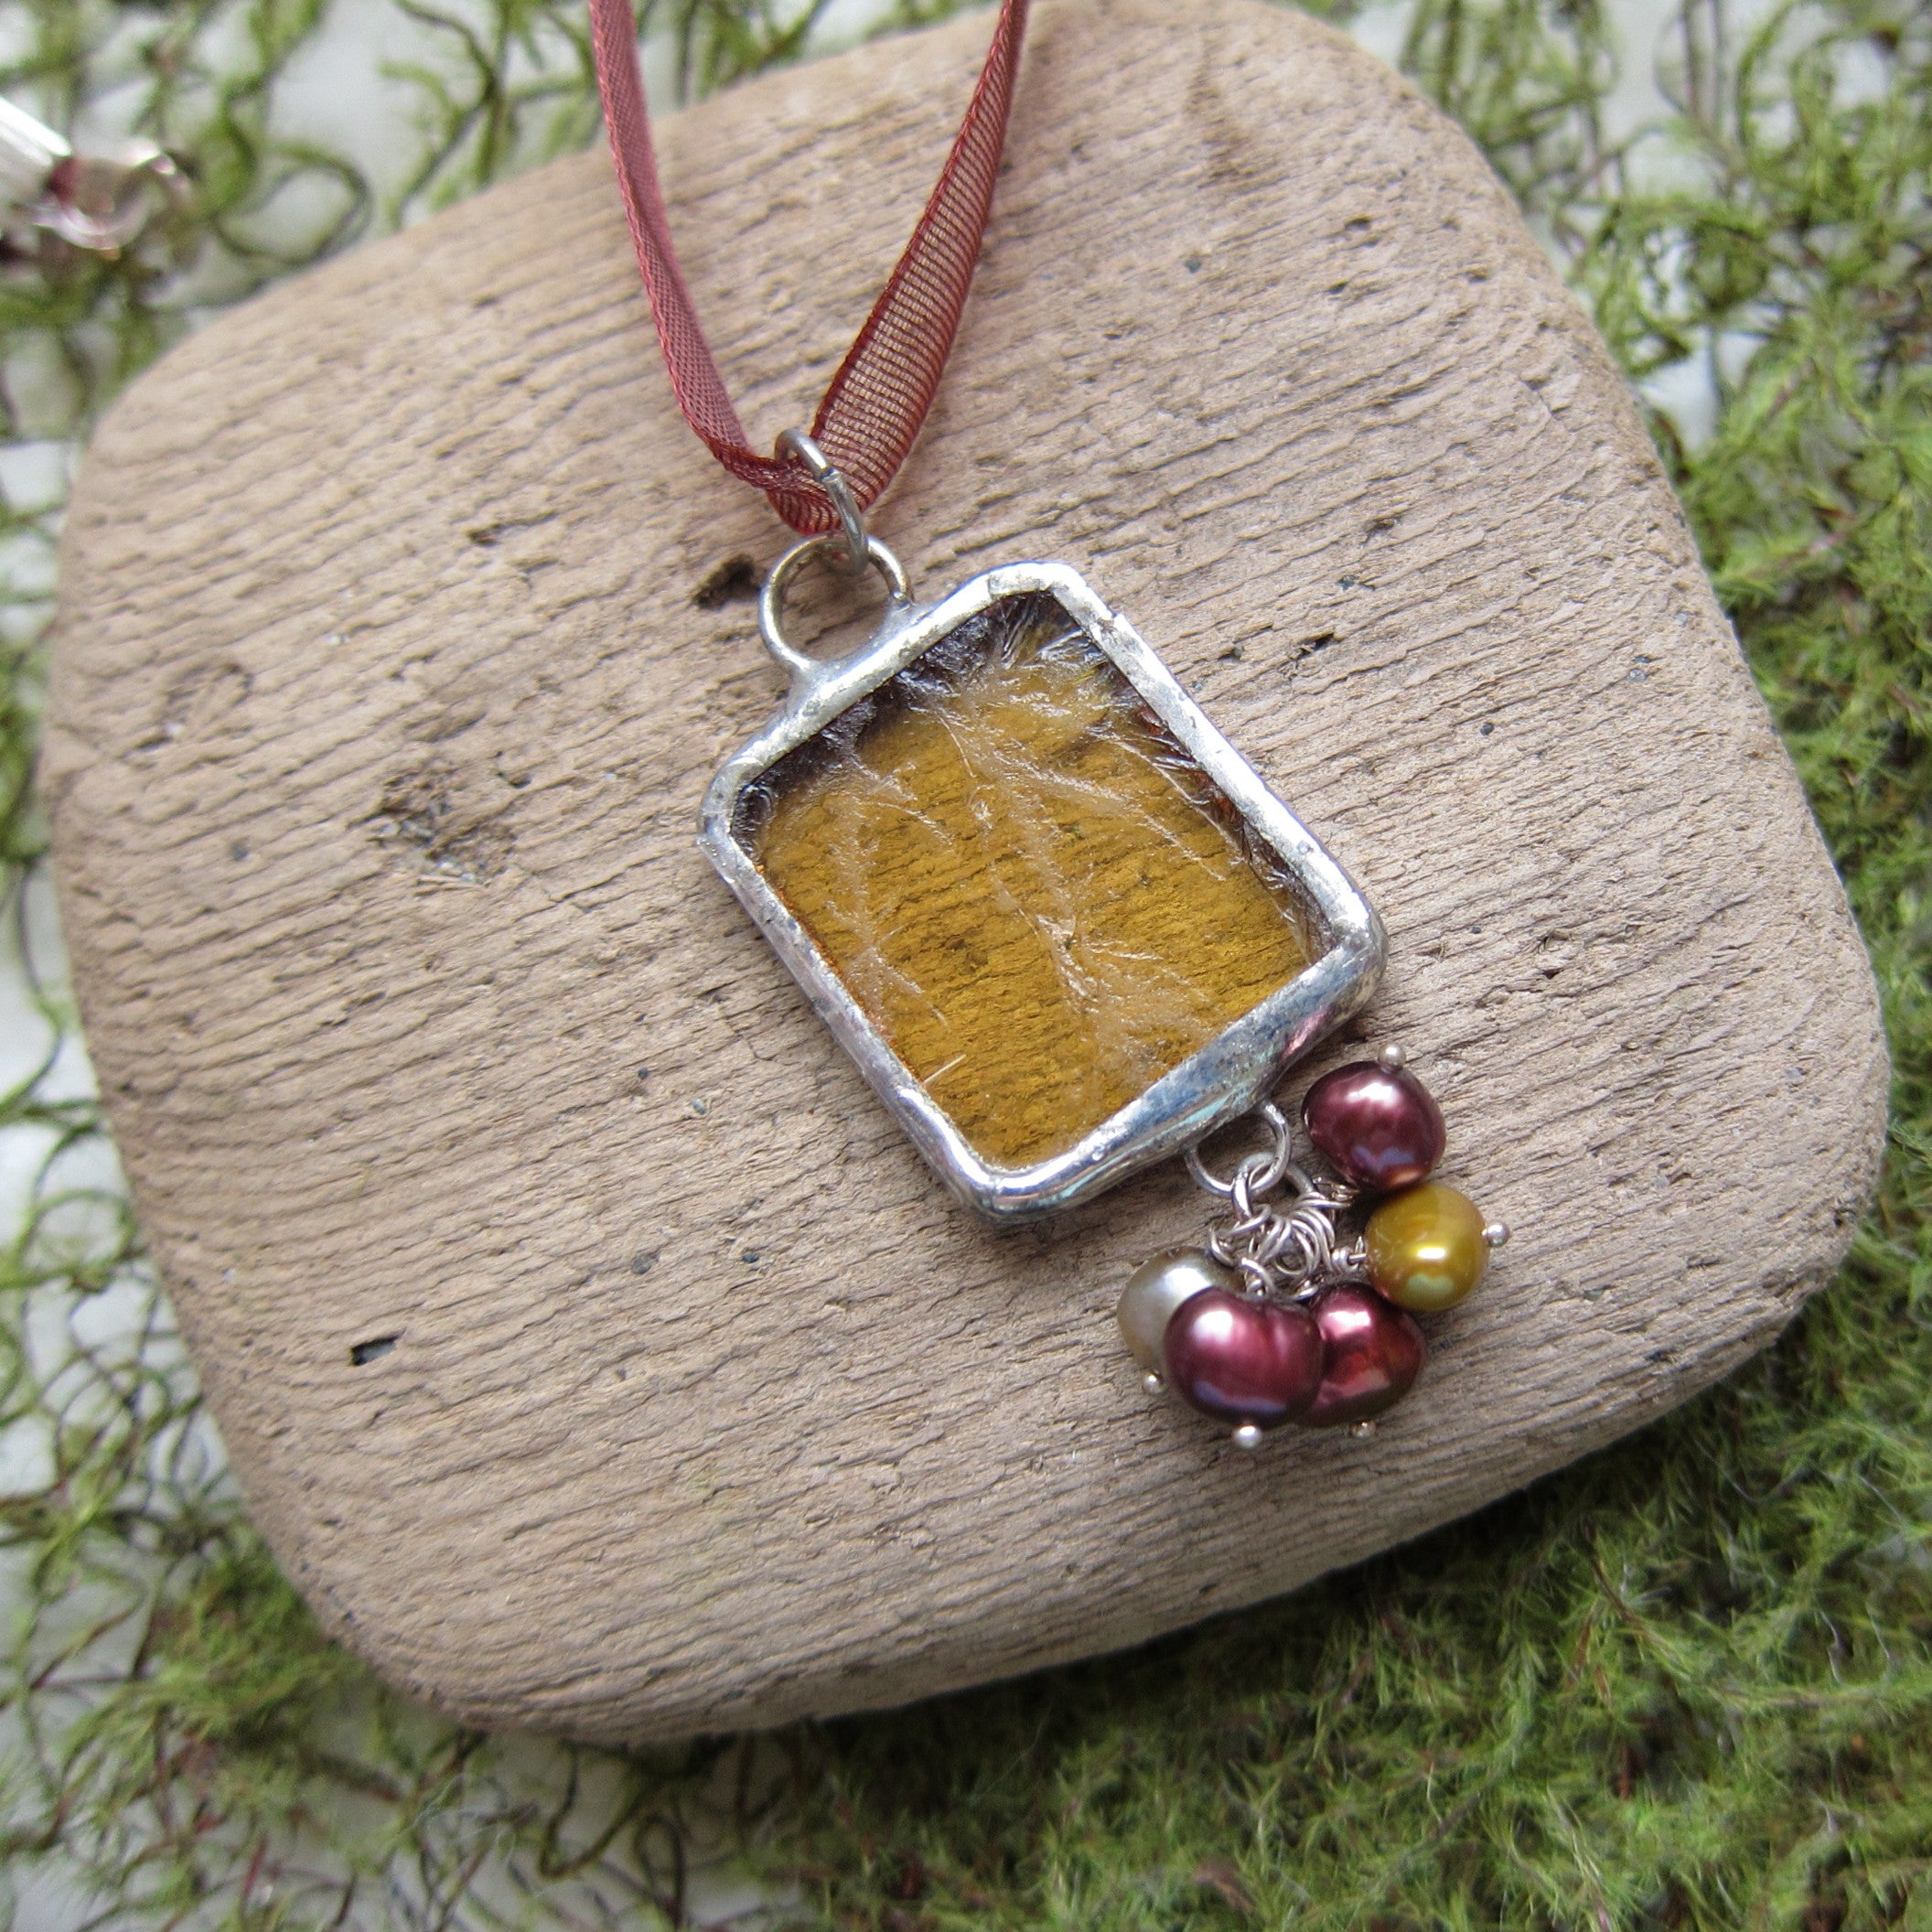 Yellow stained glass pendant necklace with freshwater pearls